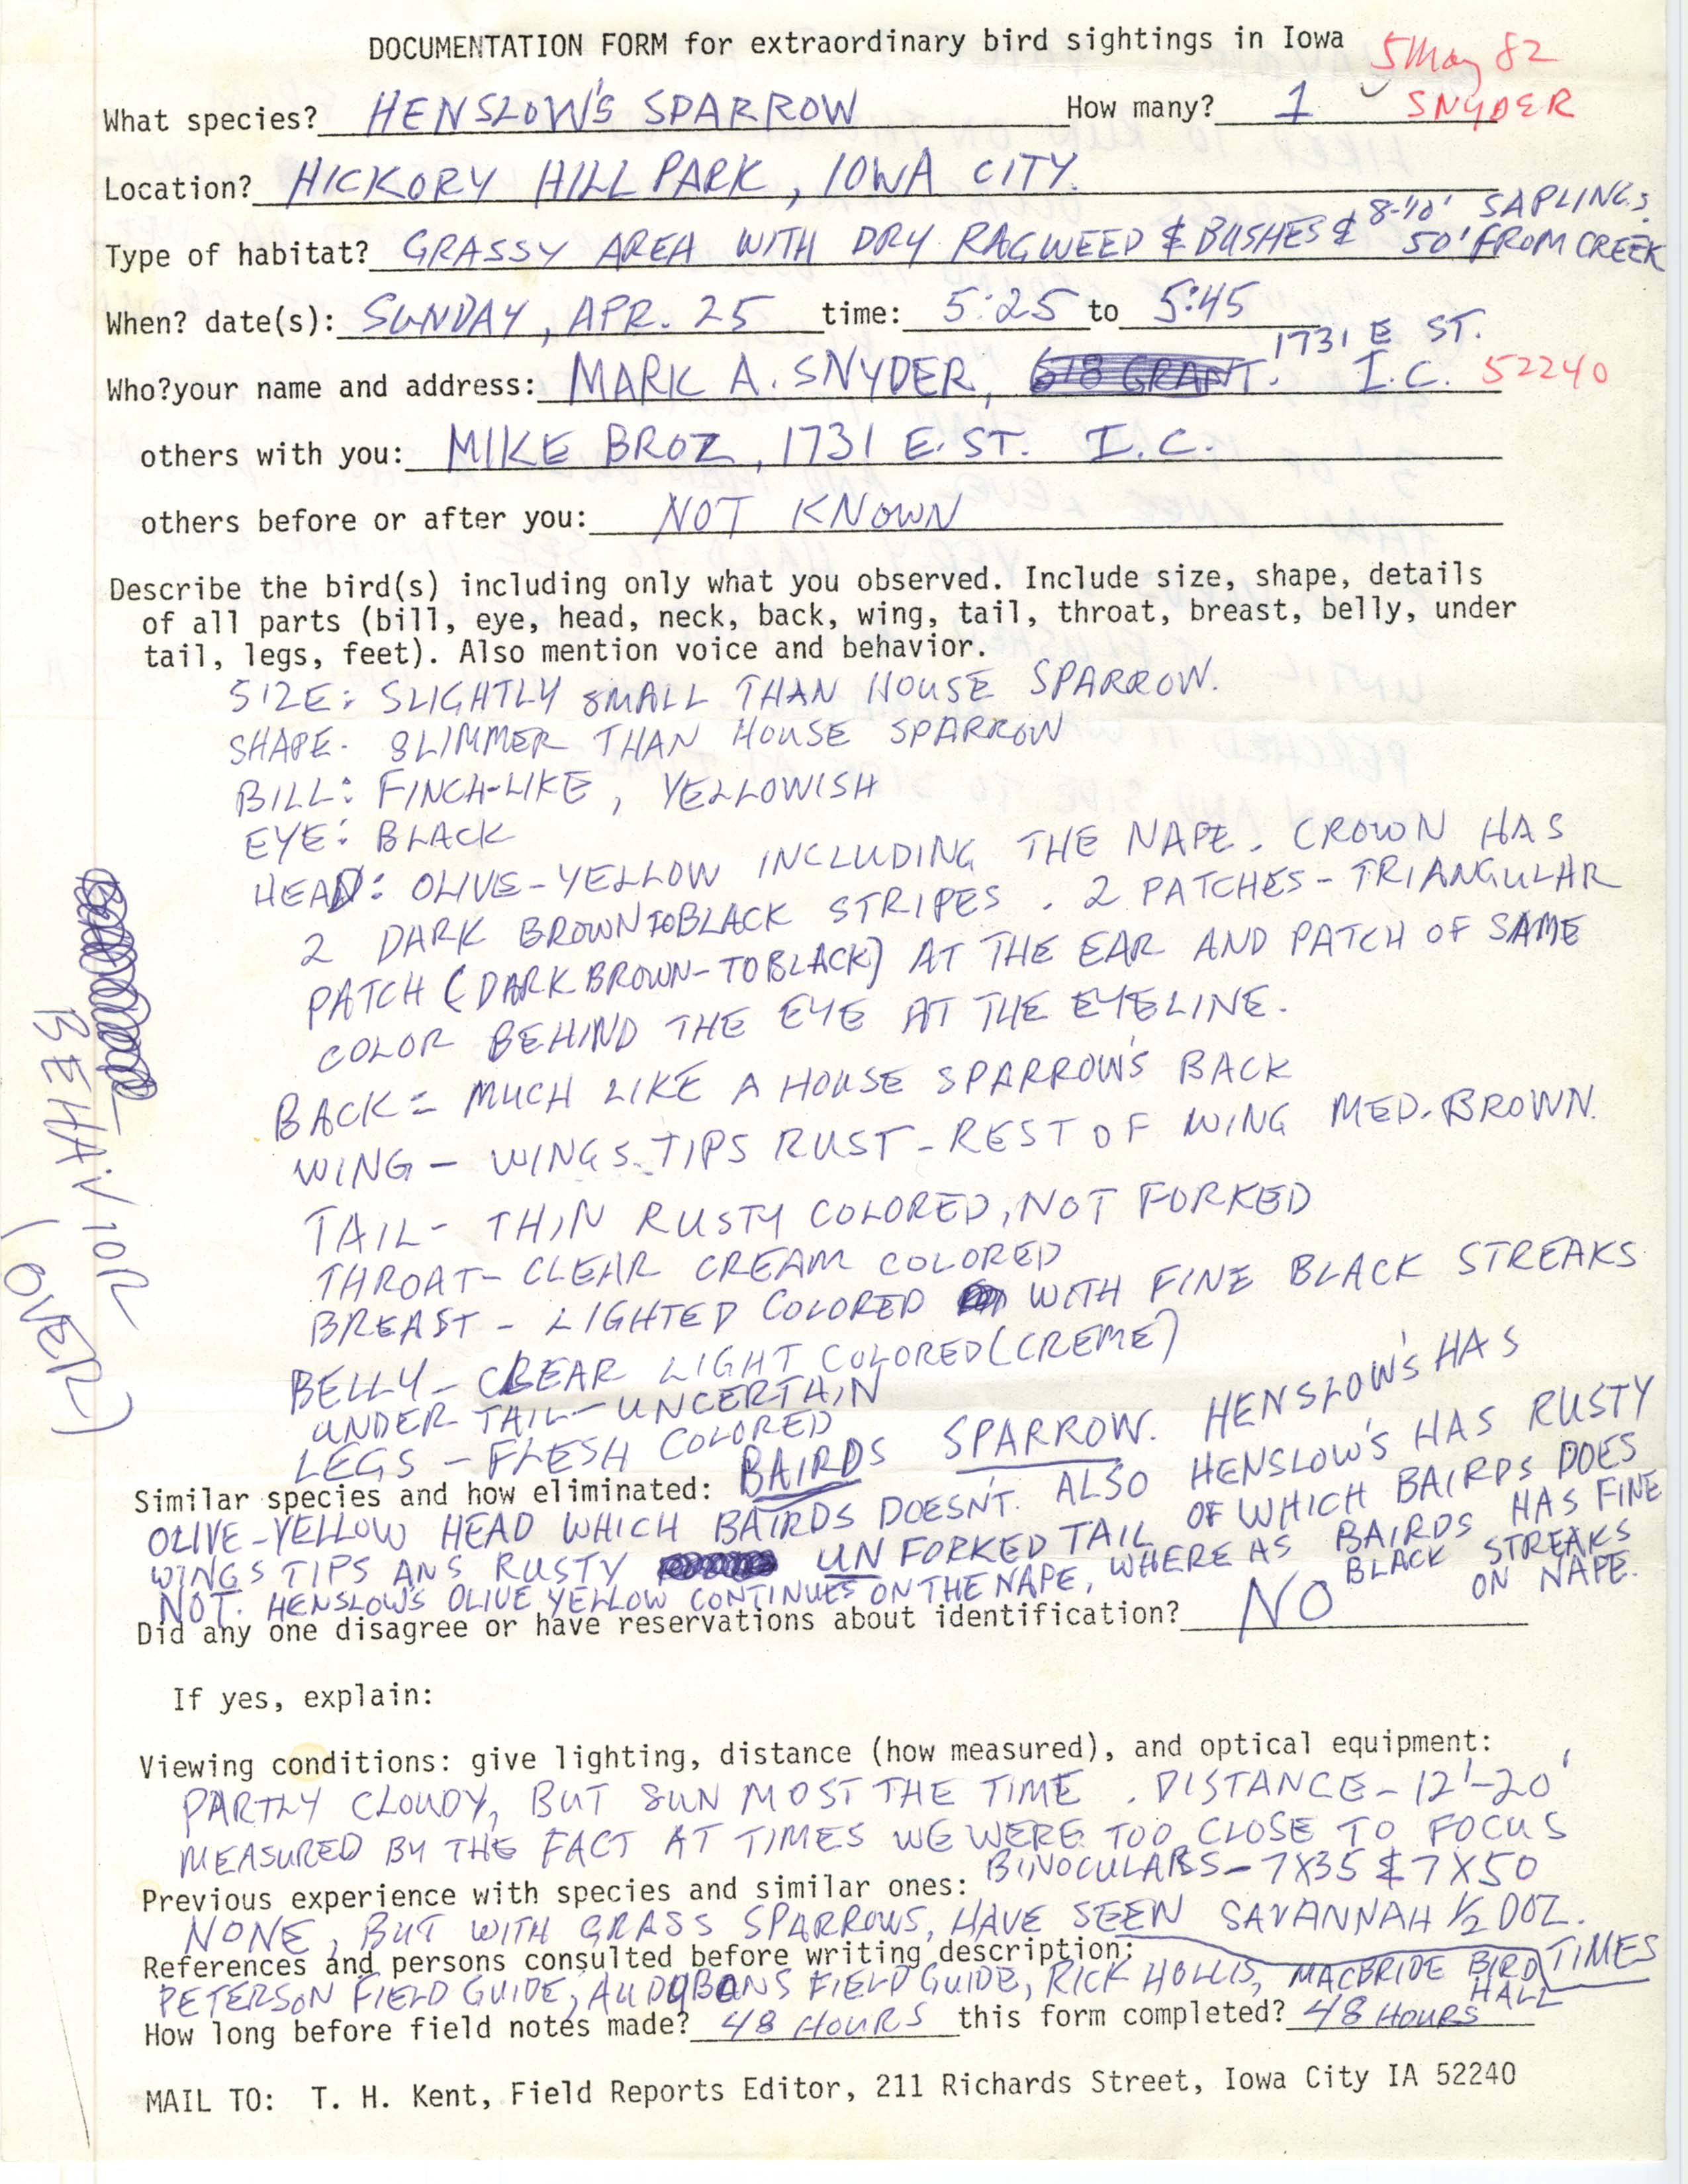 Rare bird documentation form for Henslow's Sparrow at Hickory Hill Park in Iowa City, 1982